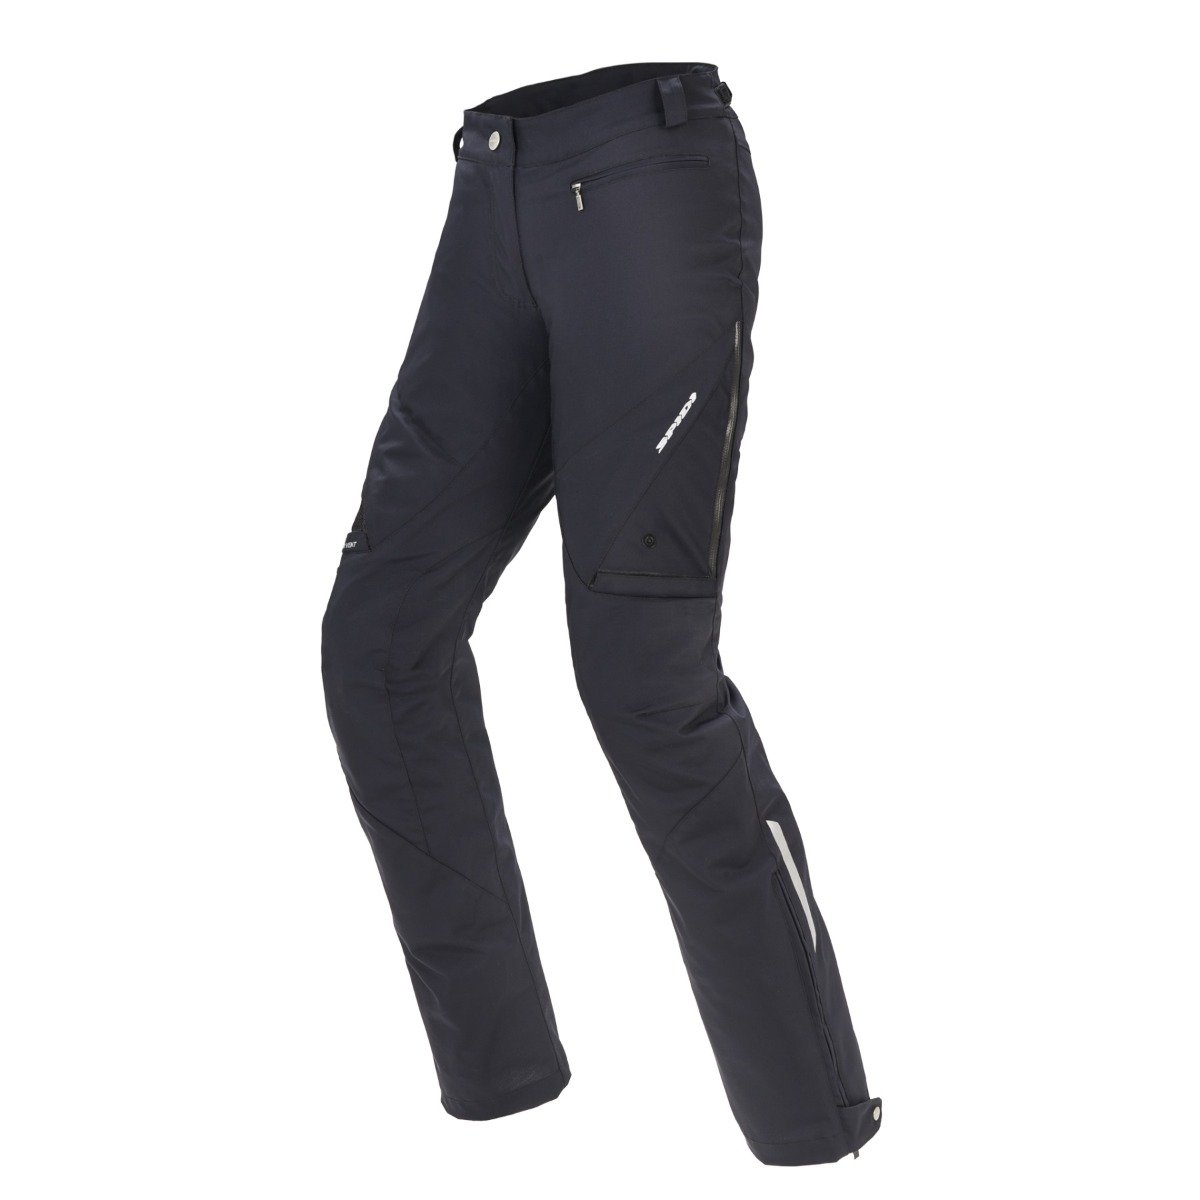 Image of Spidi Stretch Tex Lady Deep Black Motorcycle Pants Size S ID 8030161447996